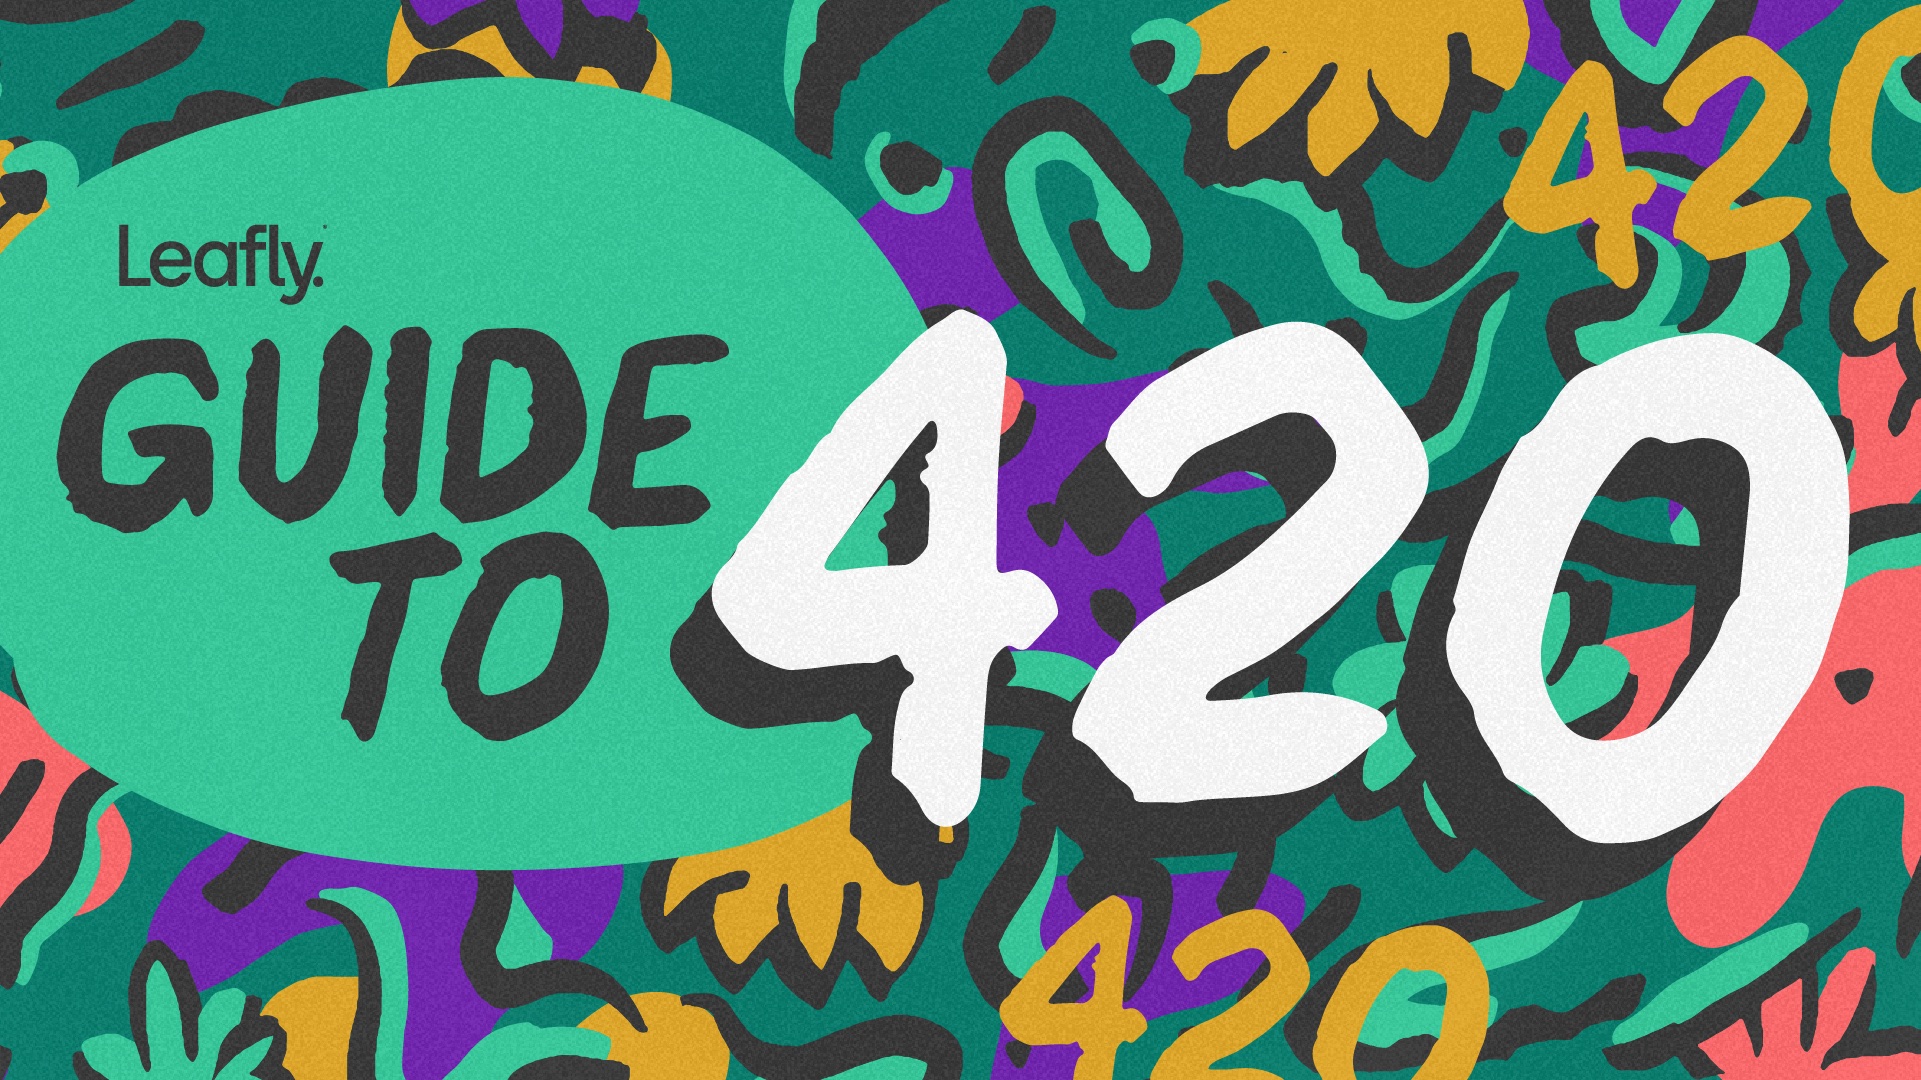 420: What does it mean and why is it celebrated?